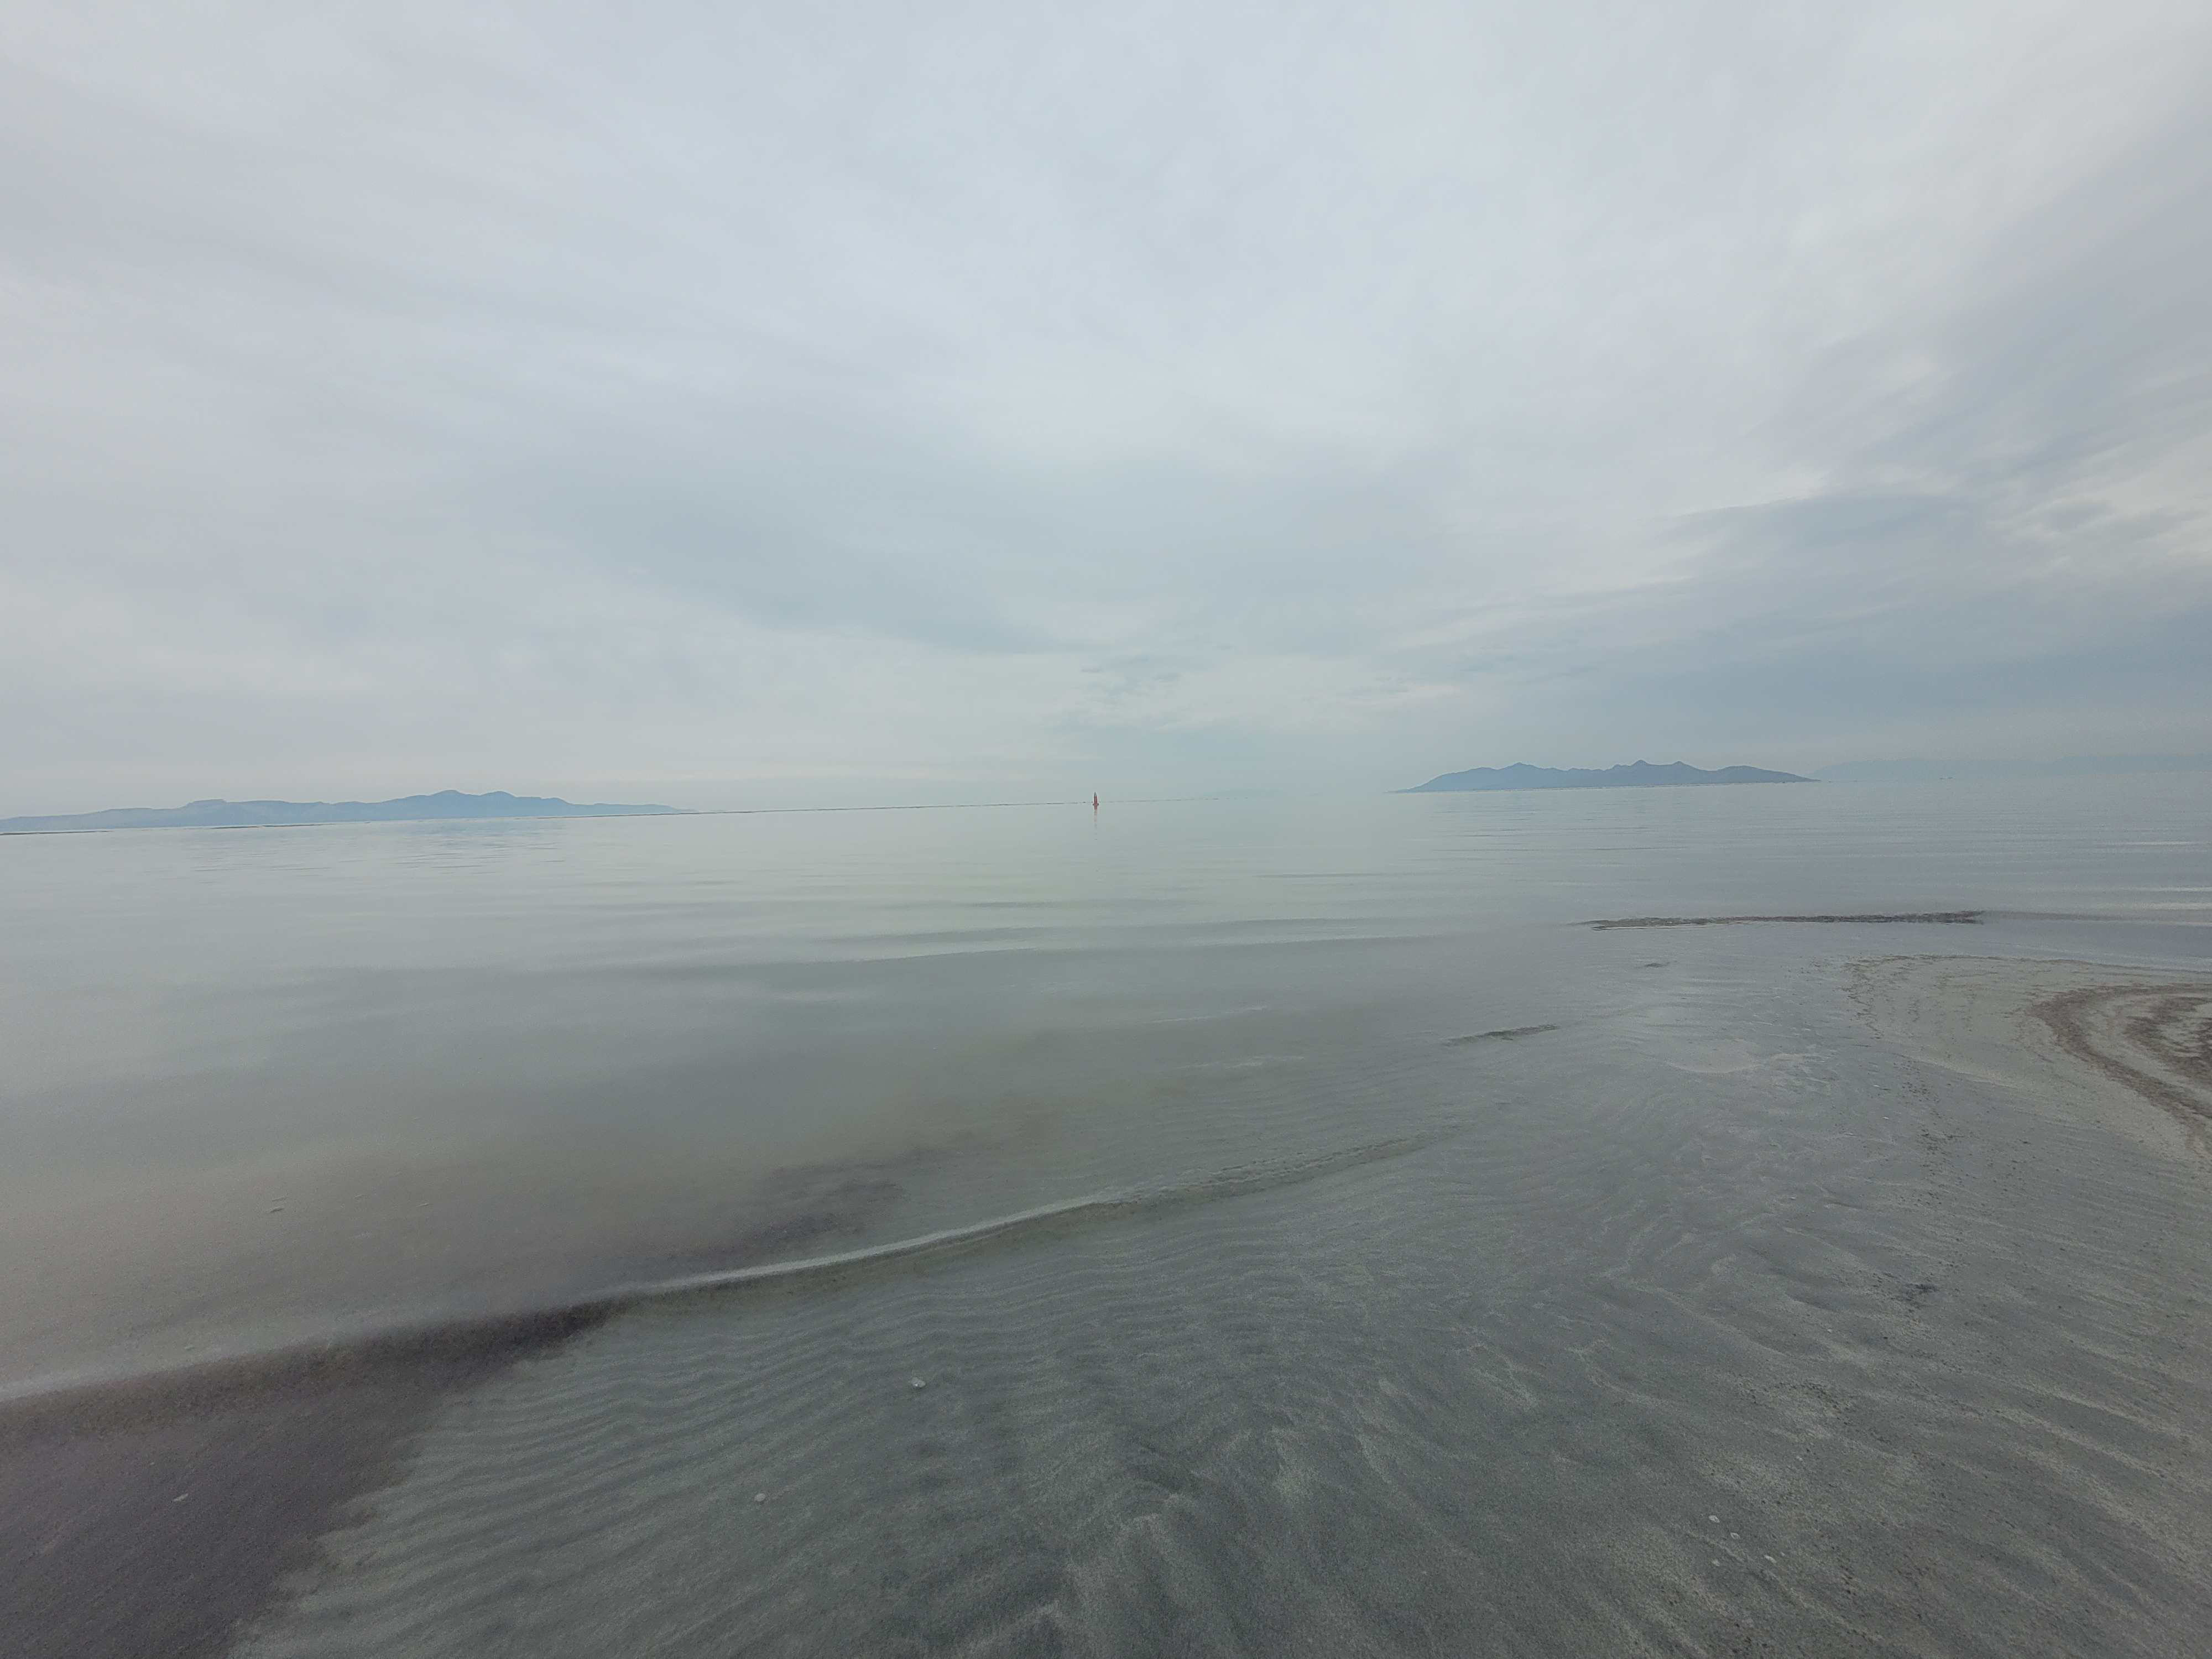 An early morning view of the Great Salt Lake shoreline, Utah.